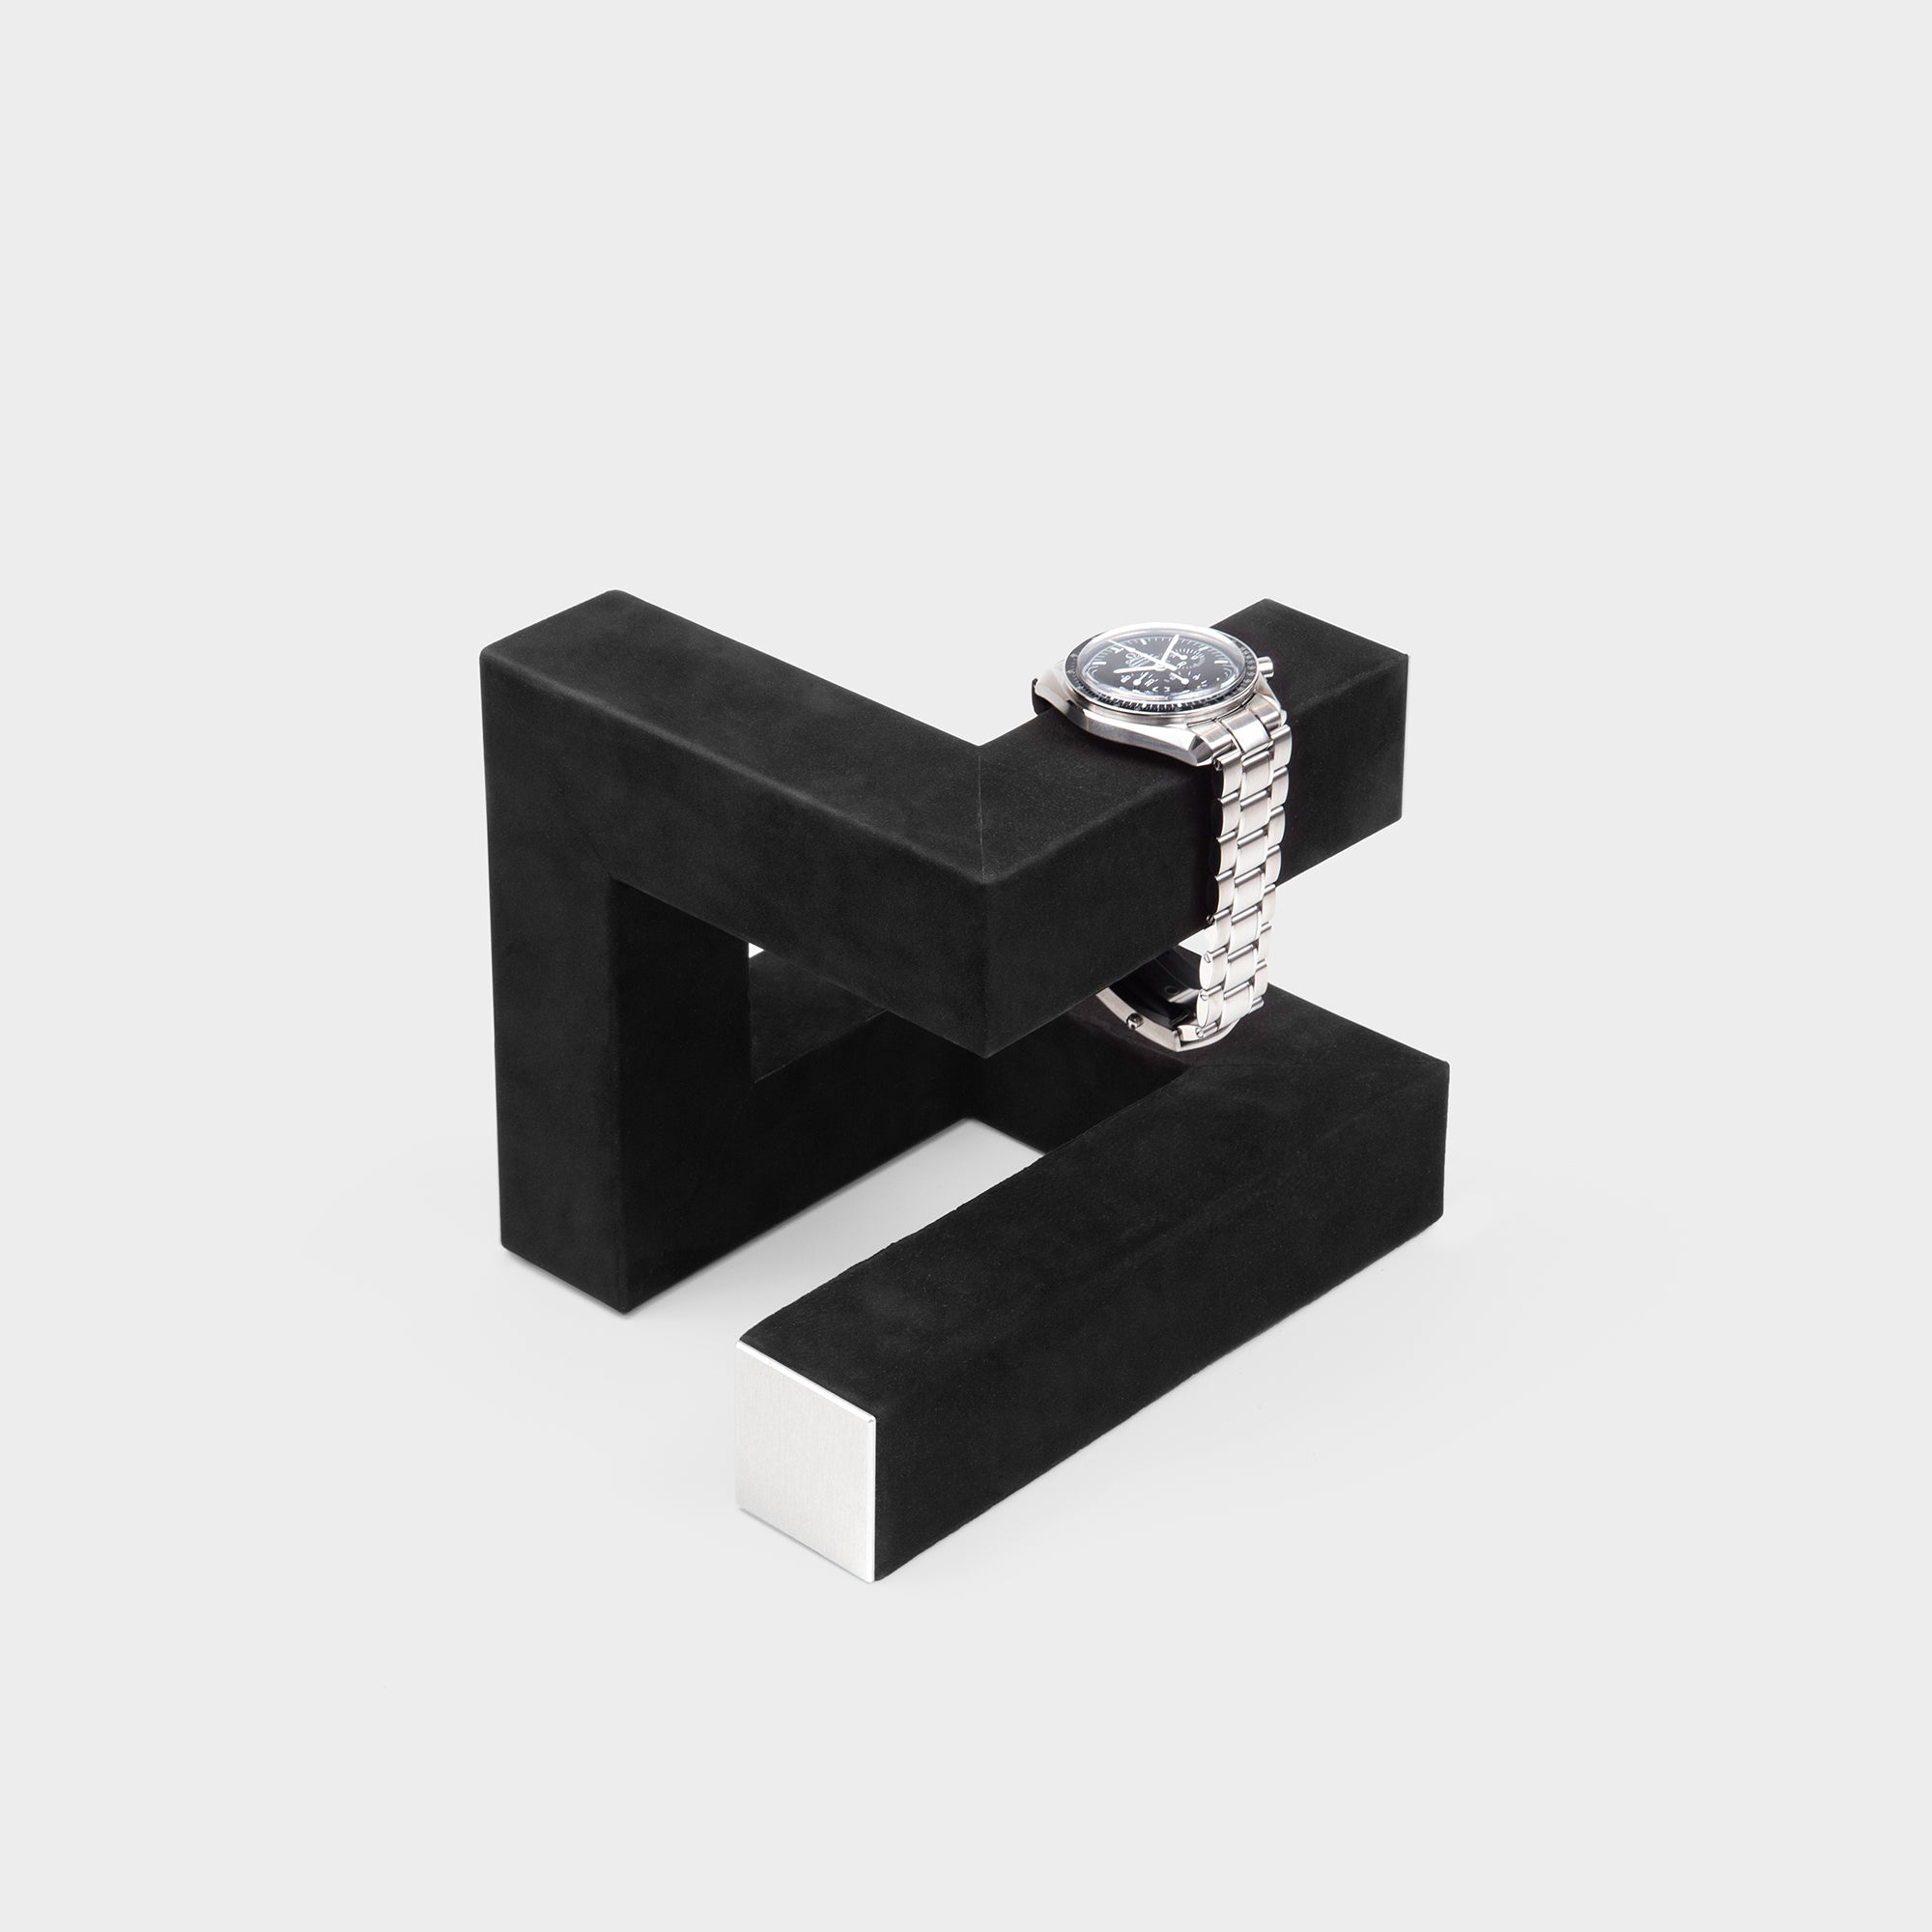 Hudson 3 watch holder in black made from solid aluminum and leather 